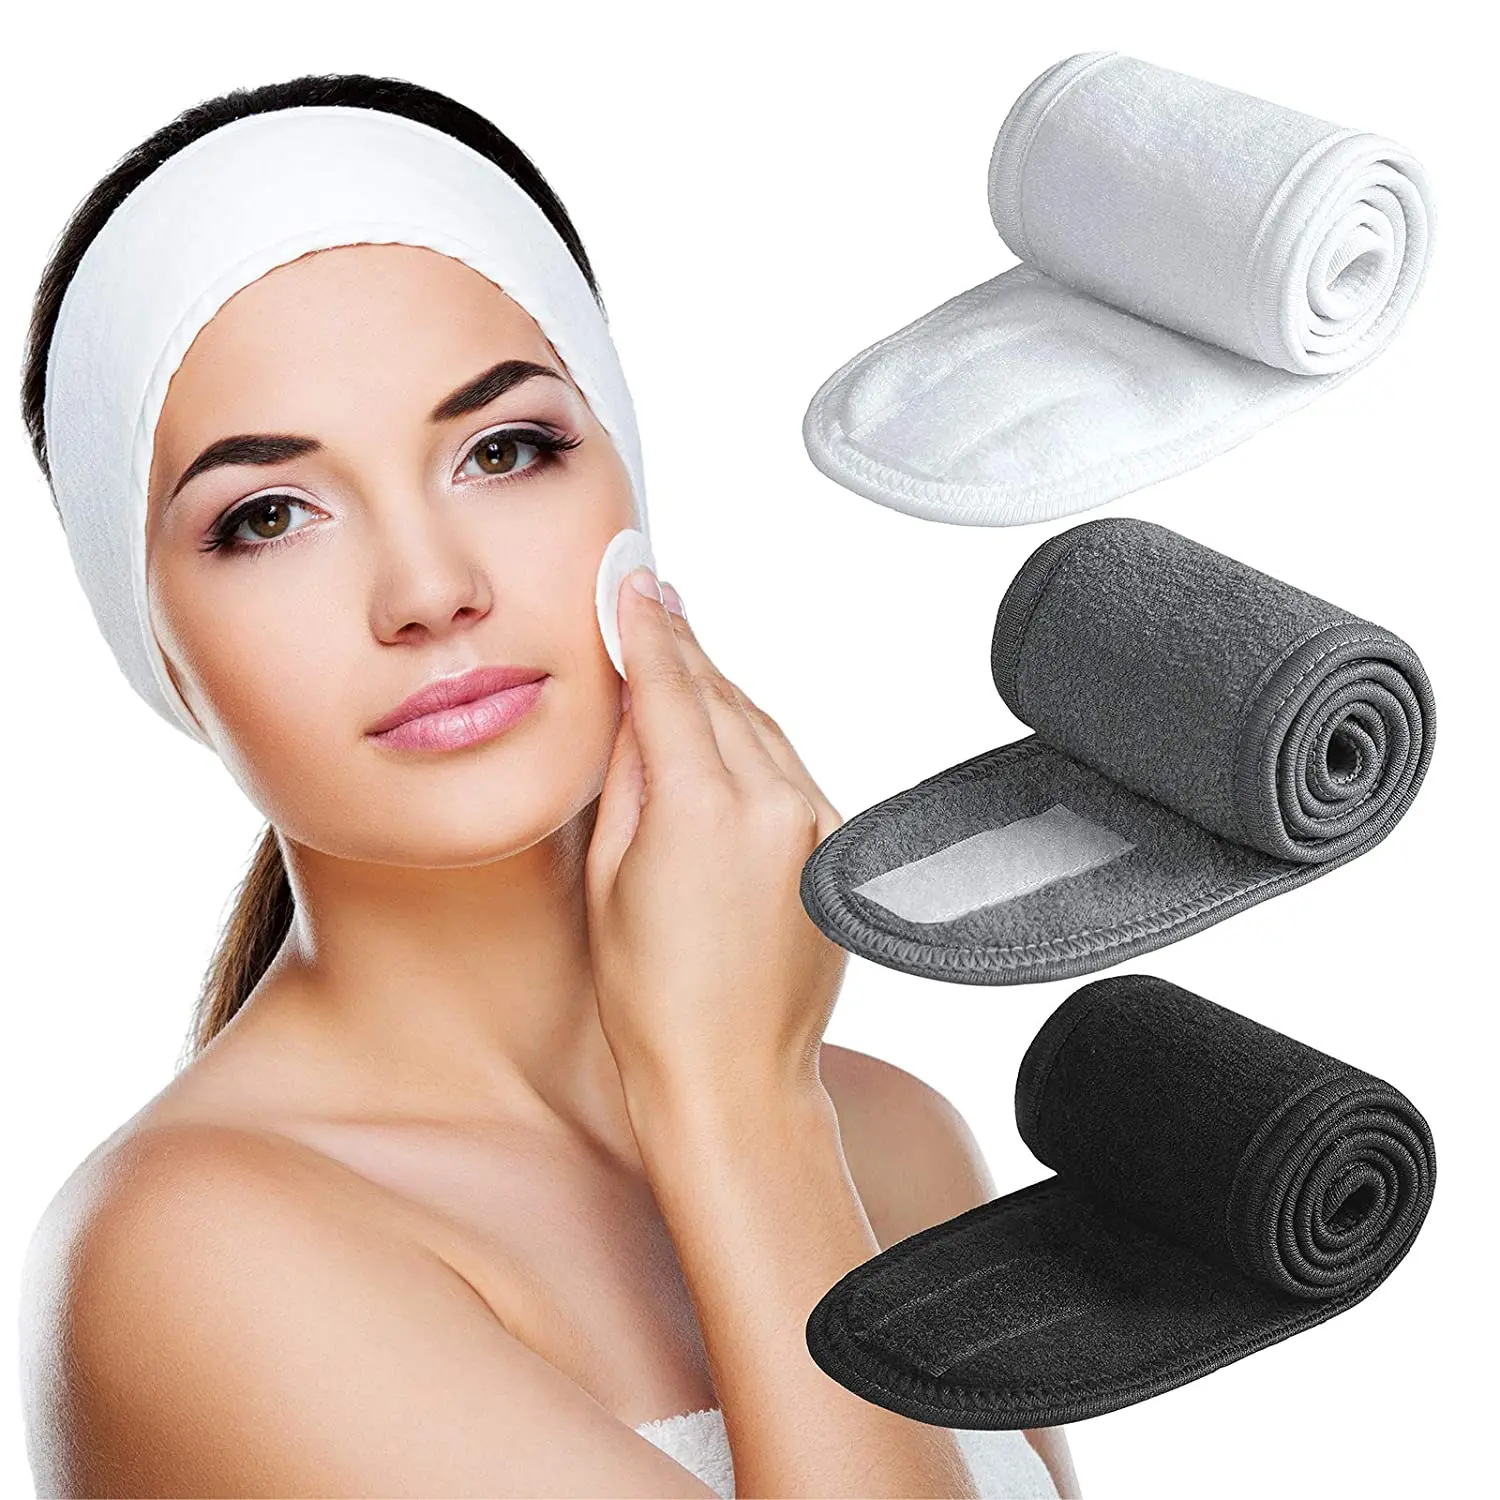 Spa Headband - 3 Pack Ultra Soft Adjustable Face Wash Headband Terry Cloth Stretch Make Up Wrap for Face Washing, Shower, Yoga